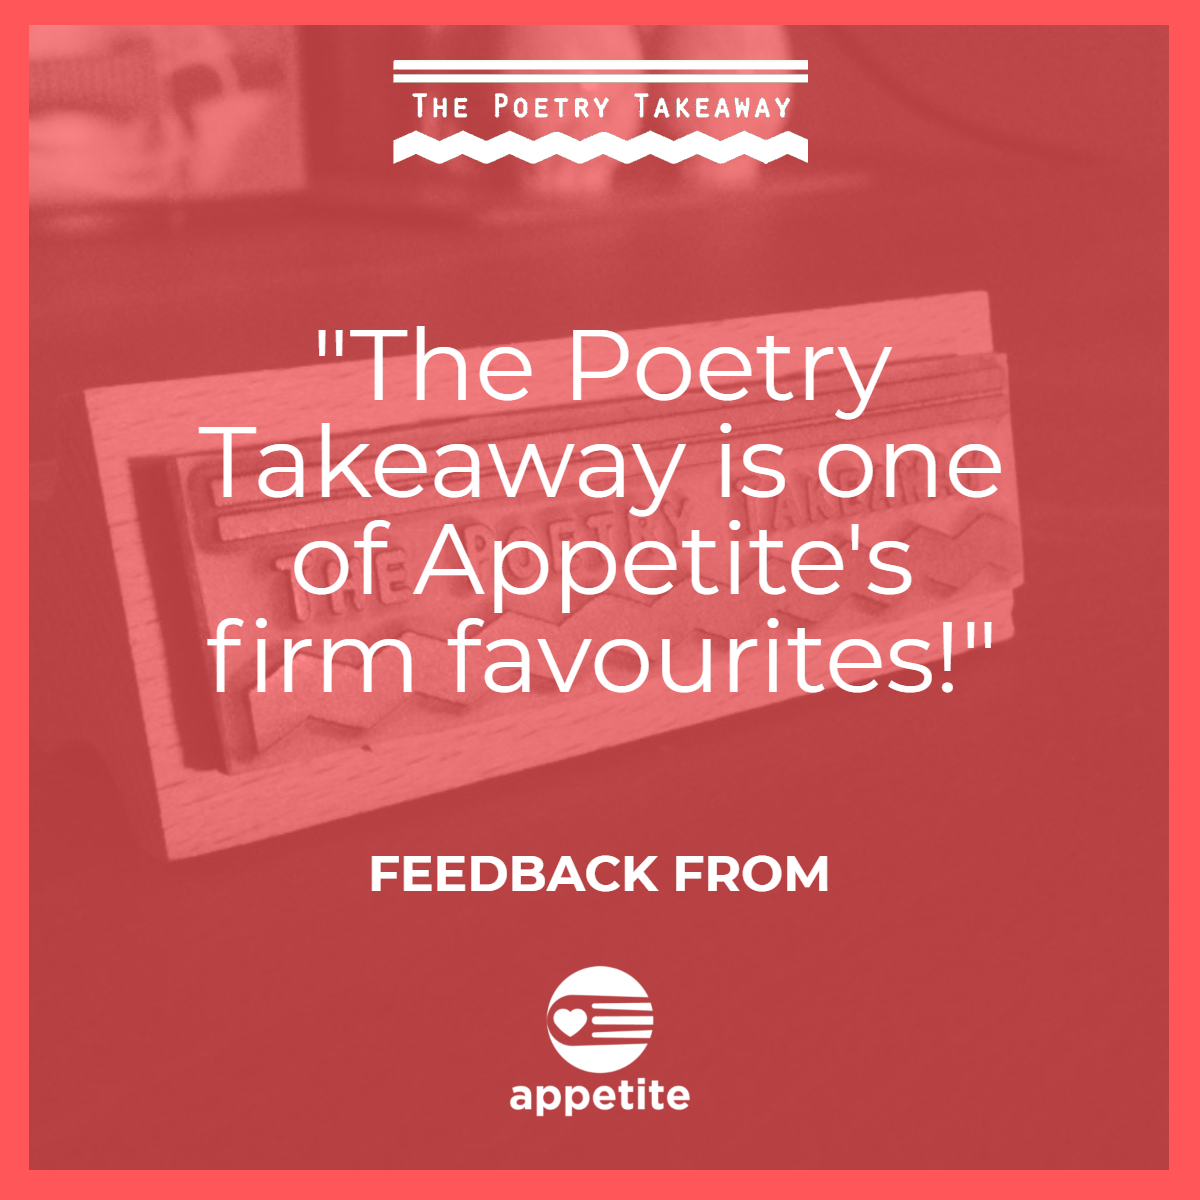 The Poetry Takeaway